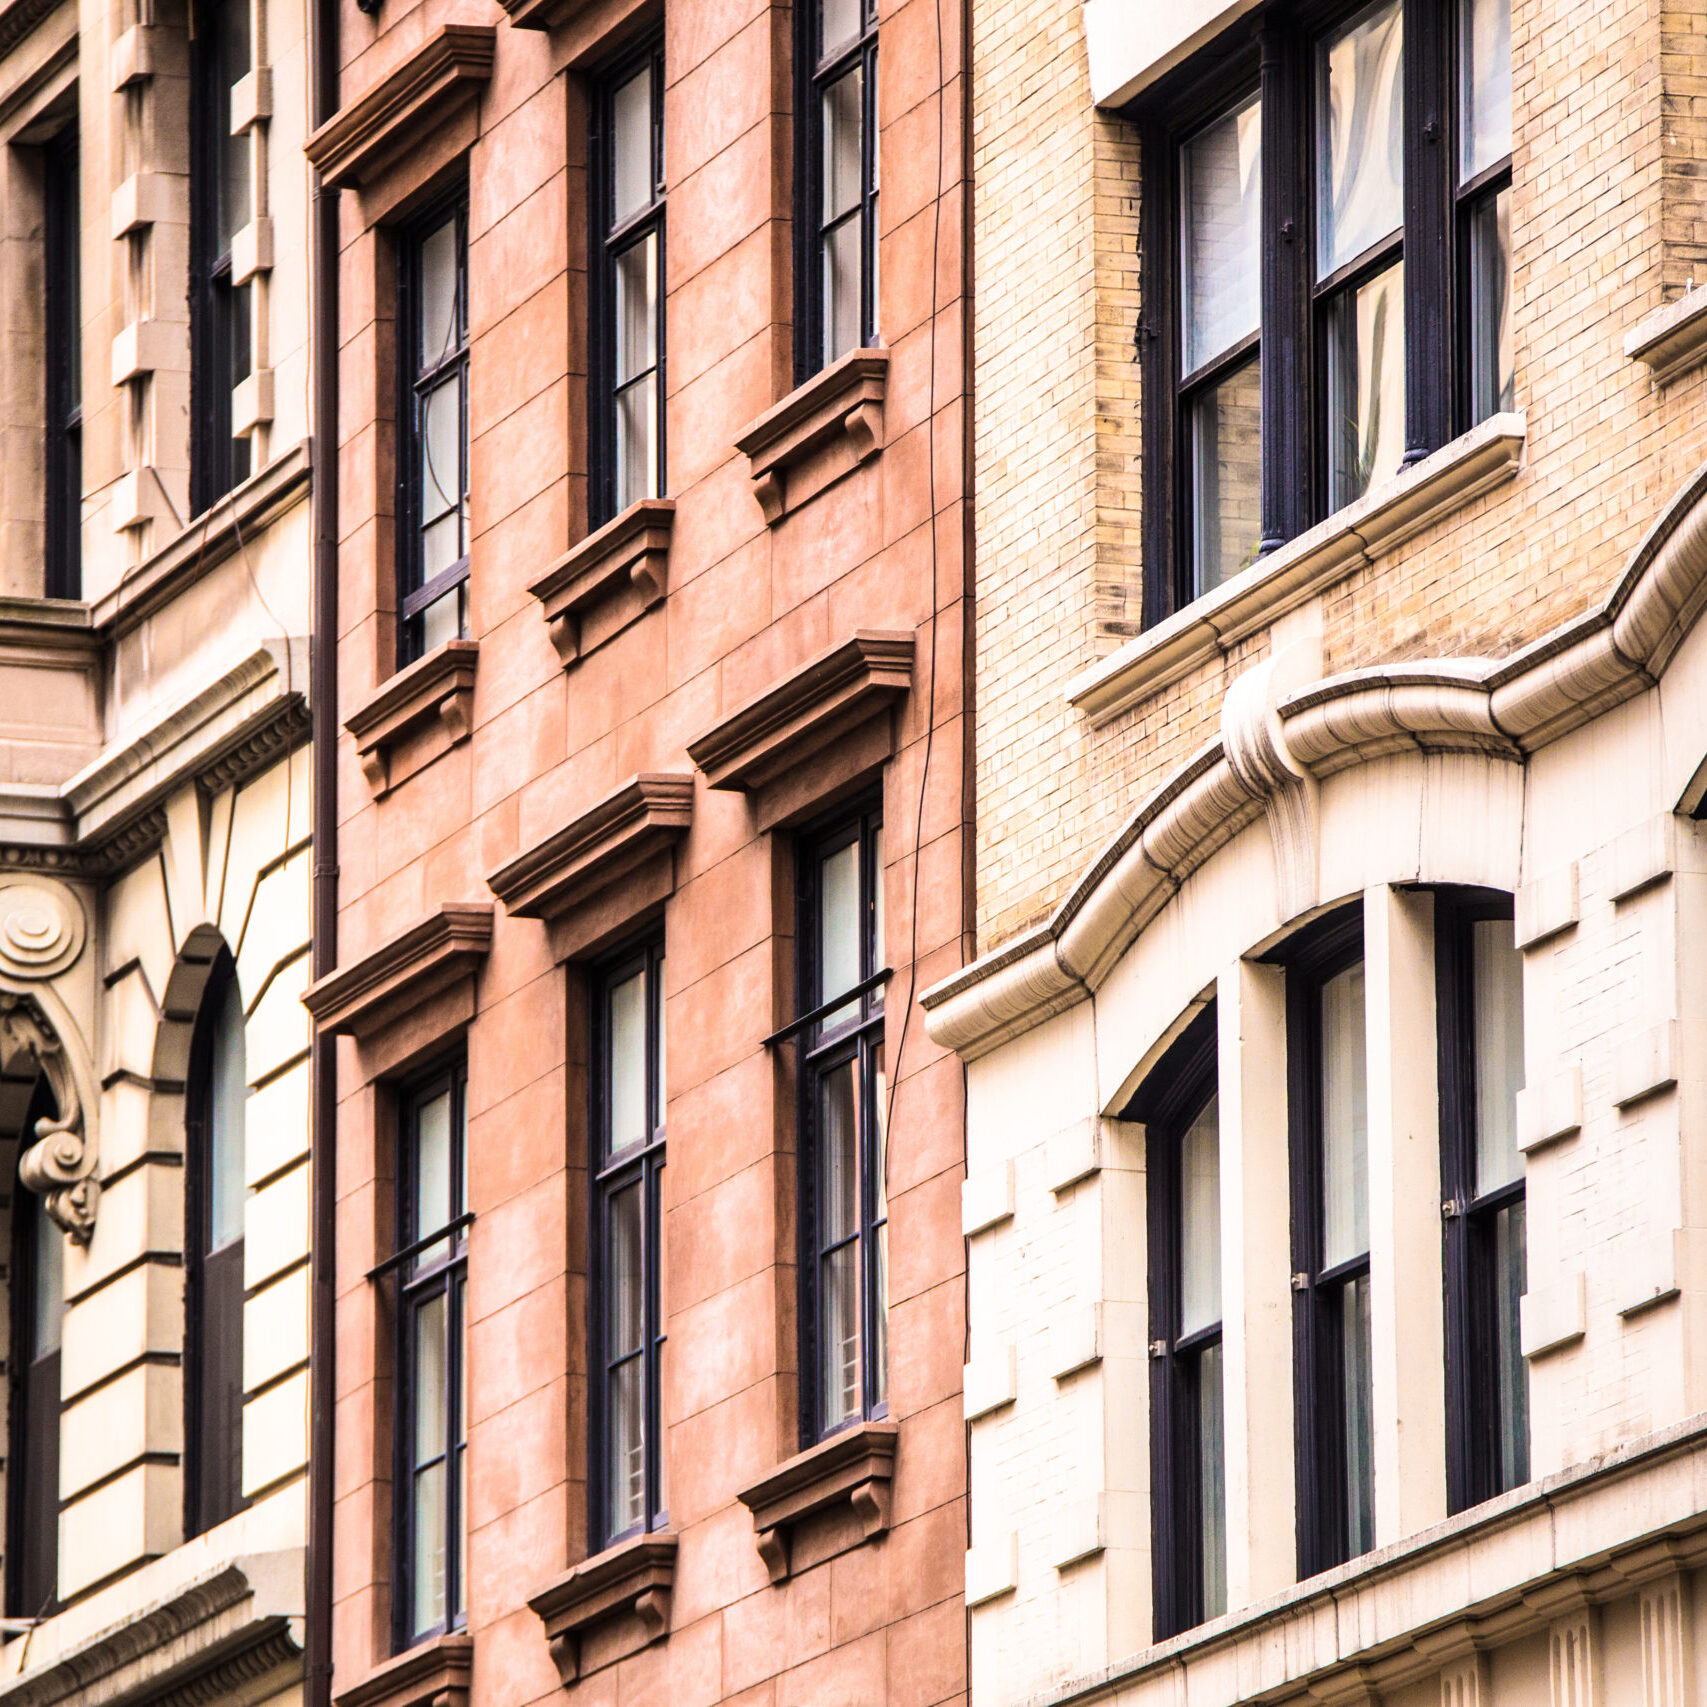 Architectural details on vintage brick apartment building in New York City